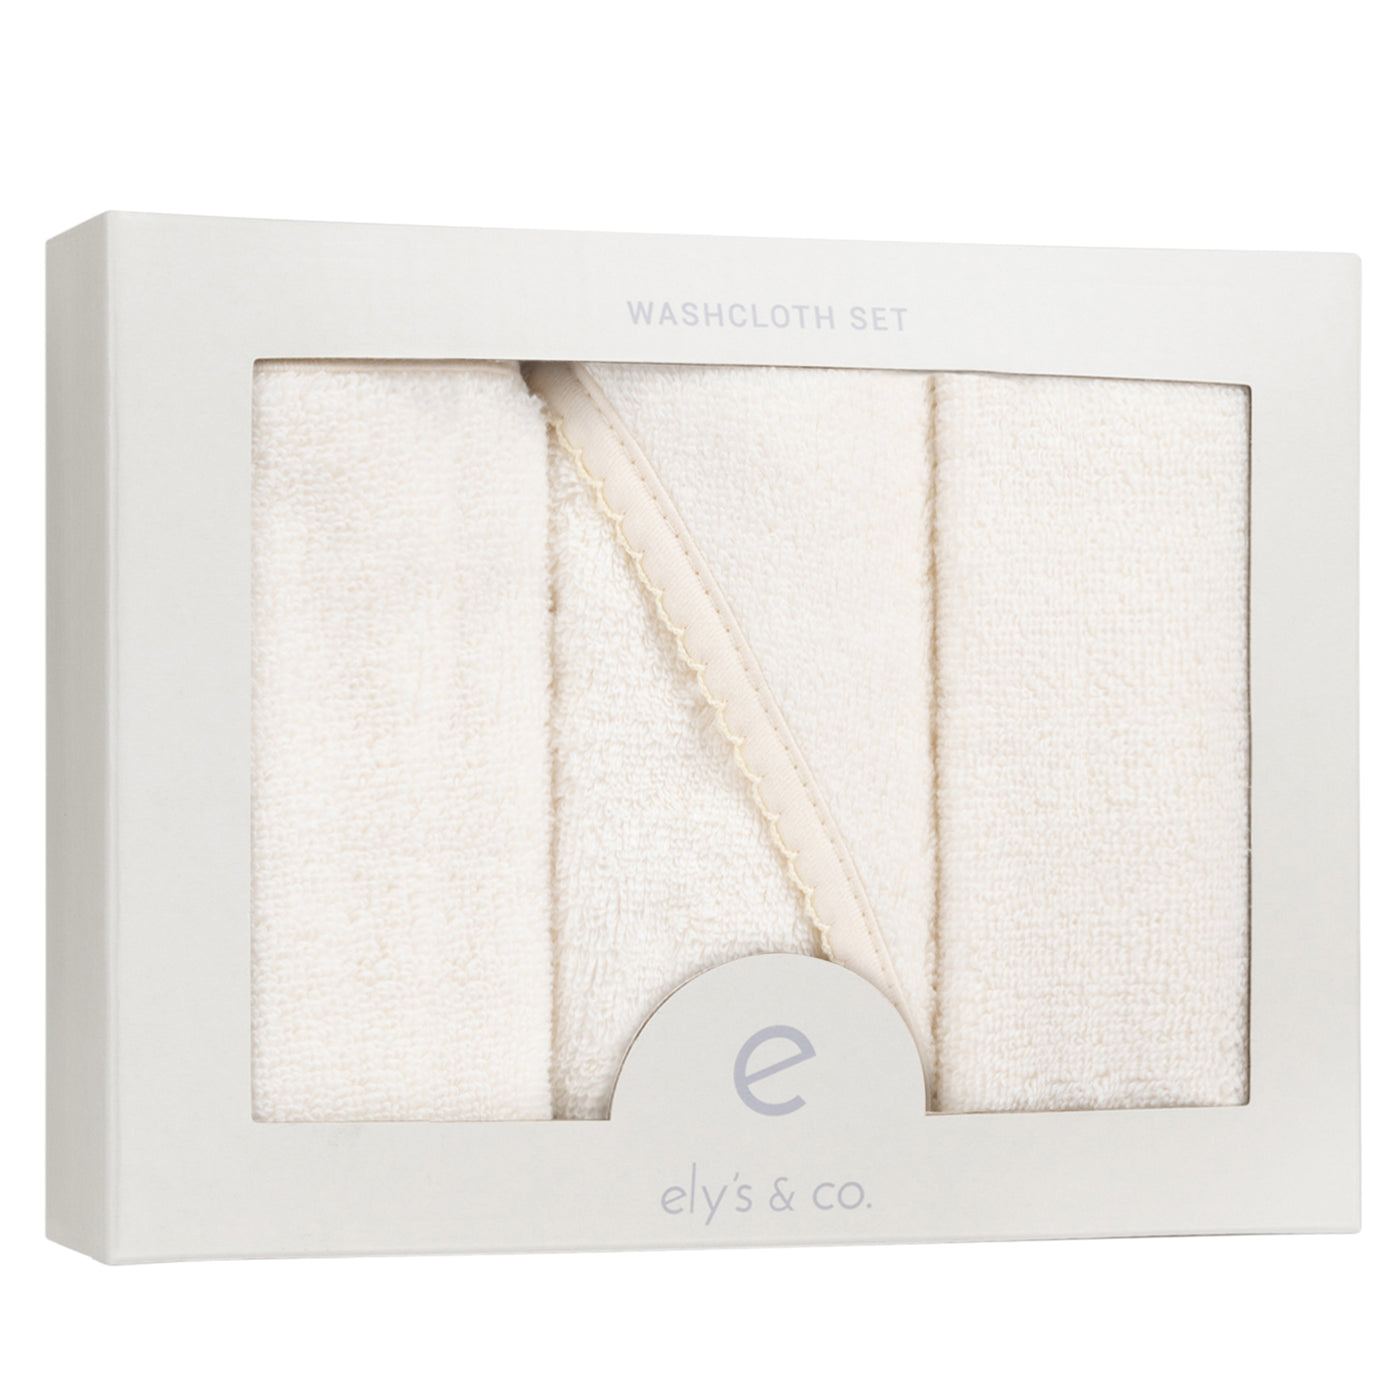 Ely's & Co. Solid Scalloped Washcloth Set- Cream Collection